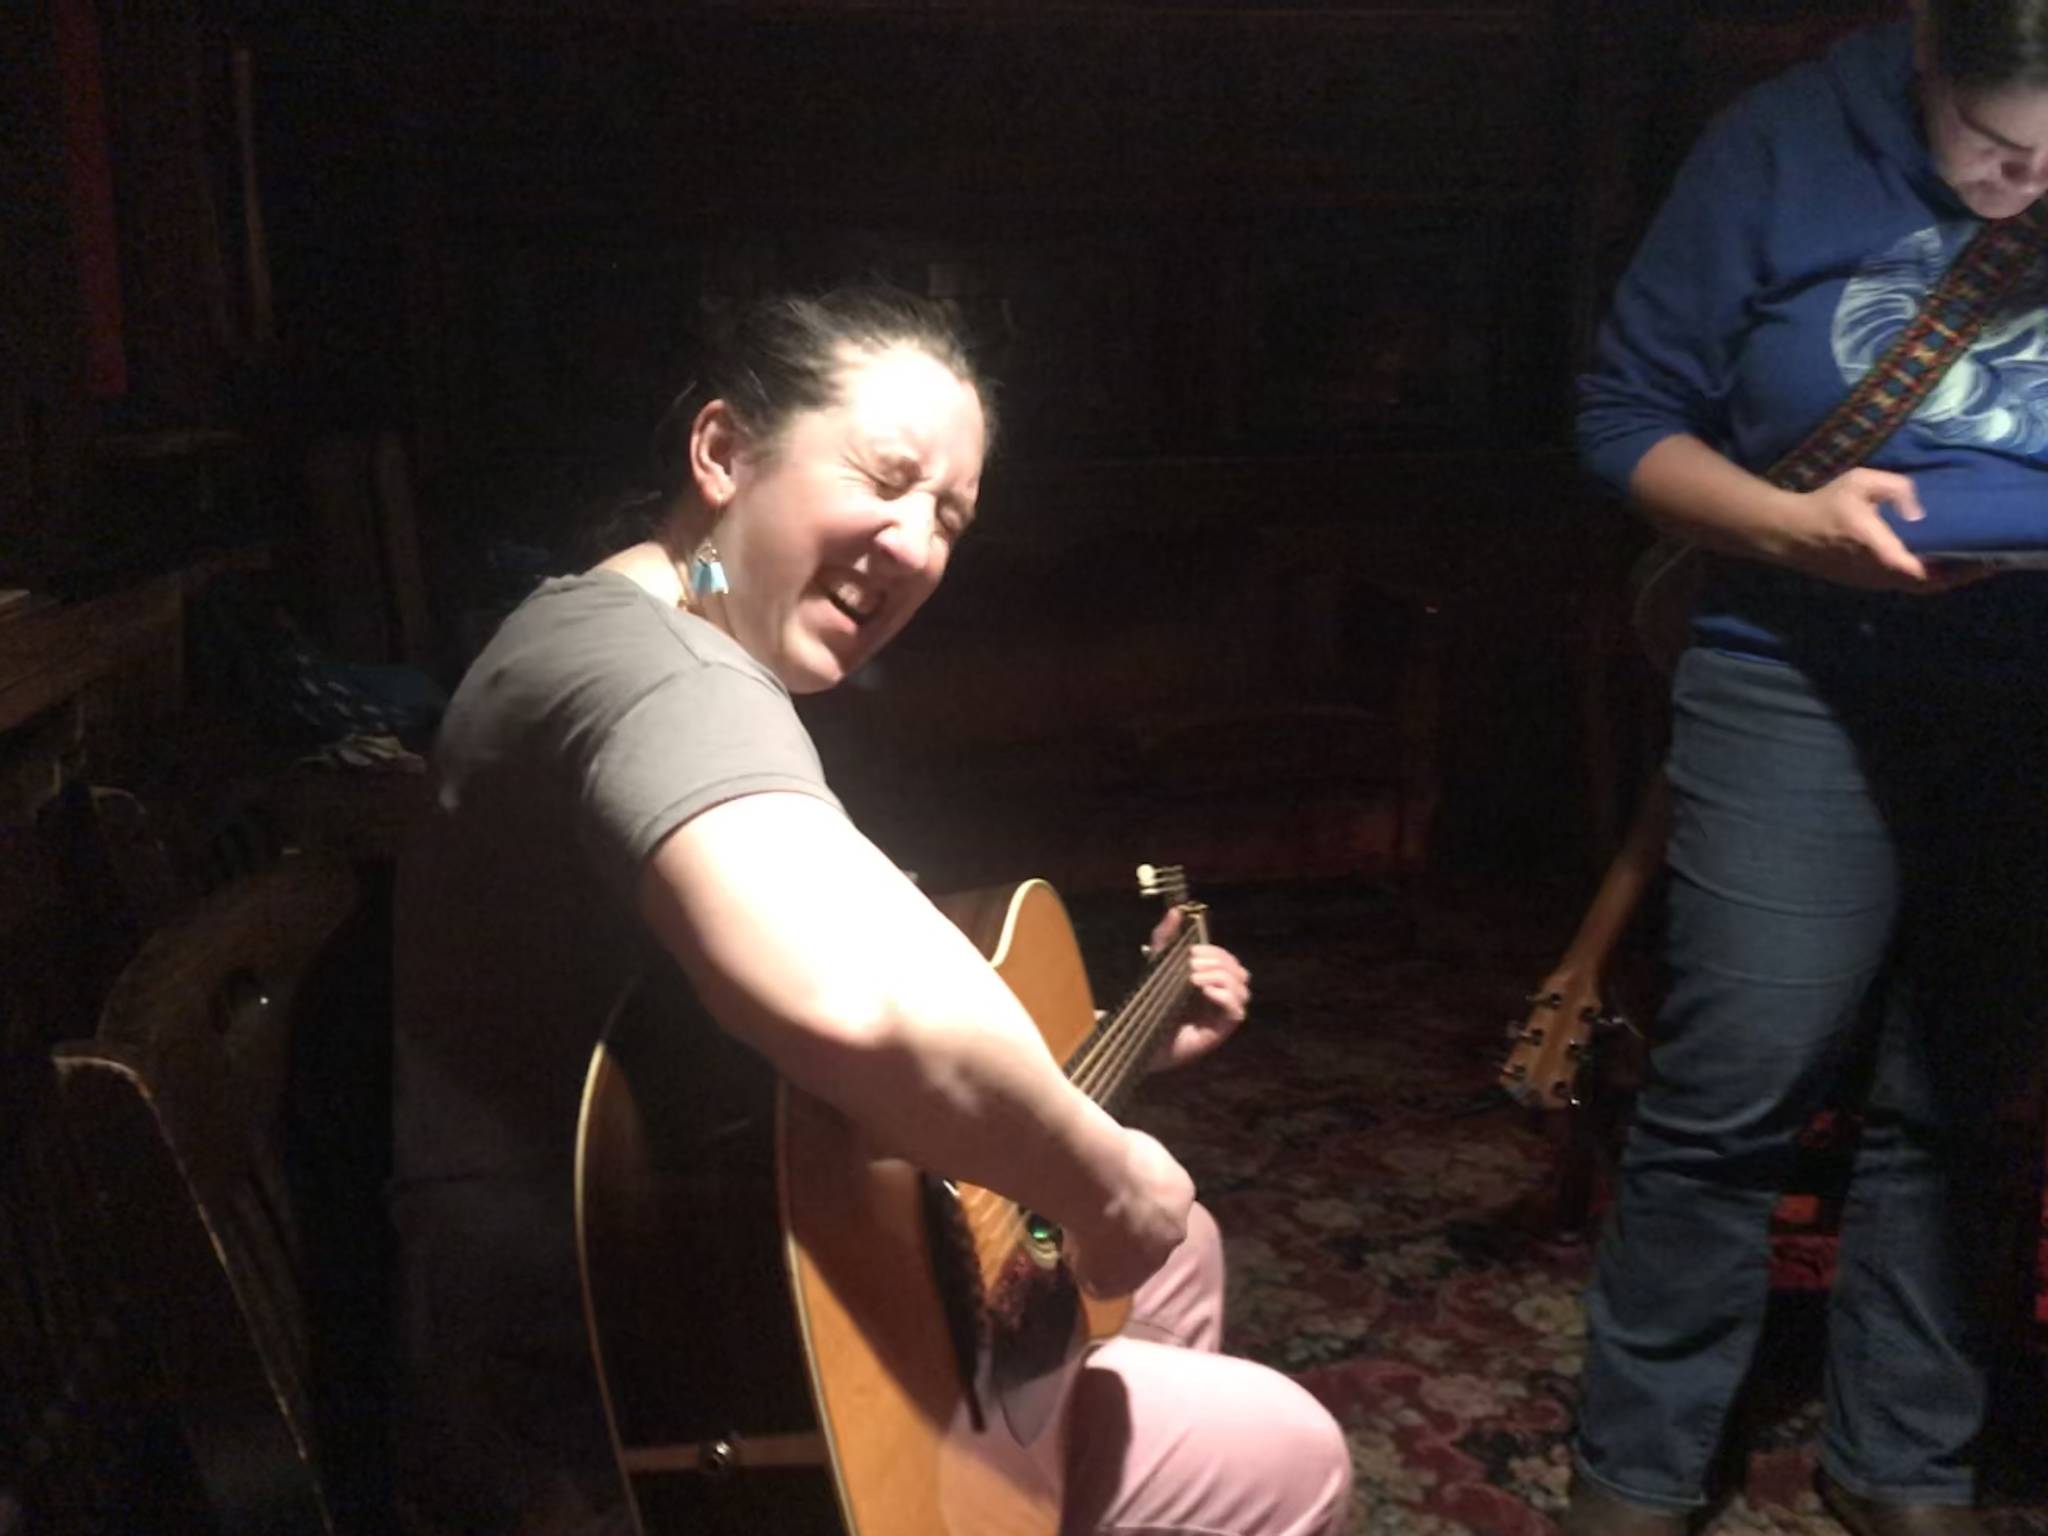 Erin Anais Heist sings during a Bluegrass Slow Jam at the Alaskan Bar on Sunday, March 1, 2020. (Mollie Barnes |For the Juneau Empire)